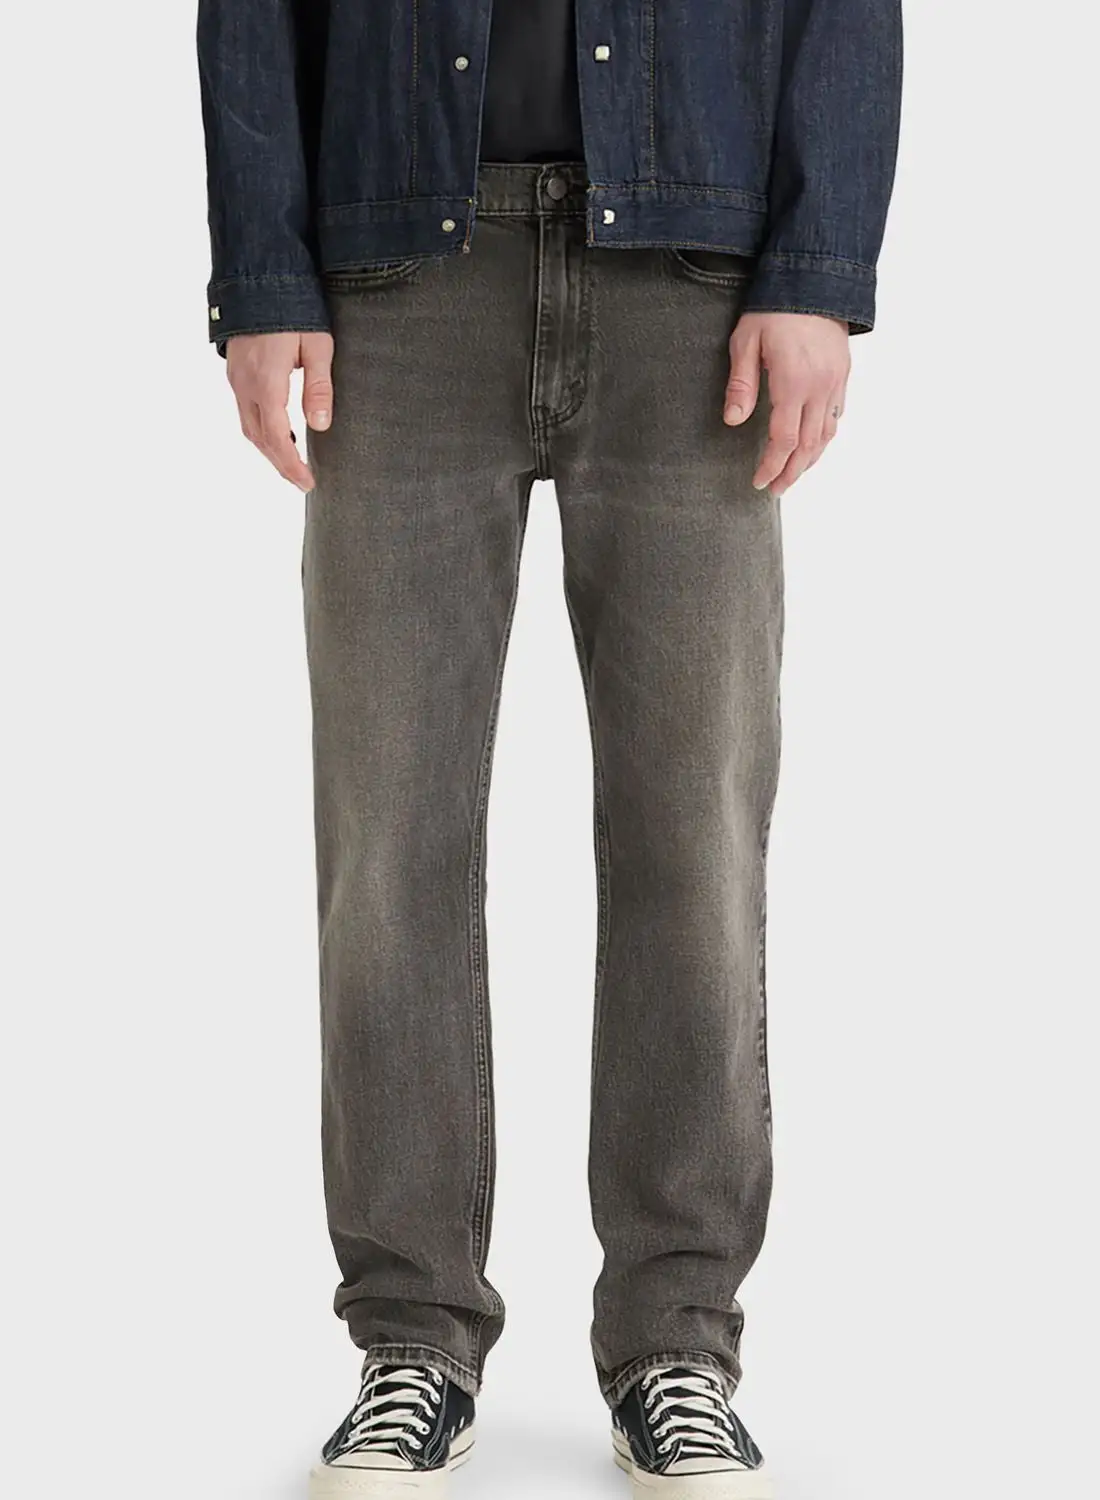 Levi's Rinse Wash Relaxed Fit Jeans